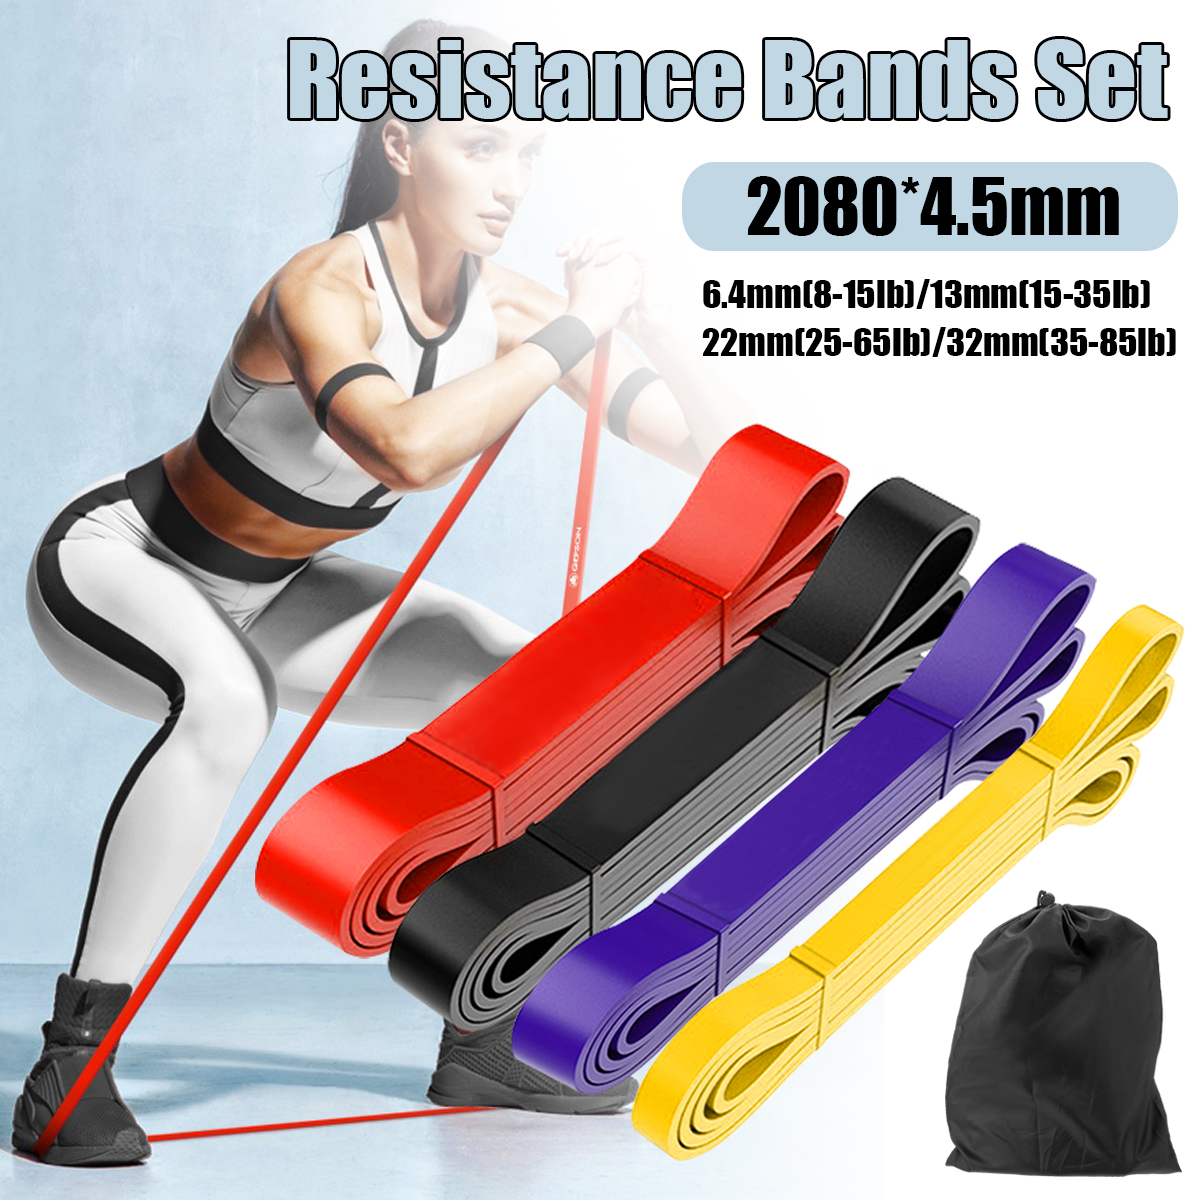 4pcs-8-85lb-2080x45mm-Resistance-Bands-Set-Heavy-Duty-Exercise-Elastic-Band-Workout-Ruber-Loop-Power-1681447-2